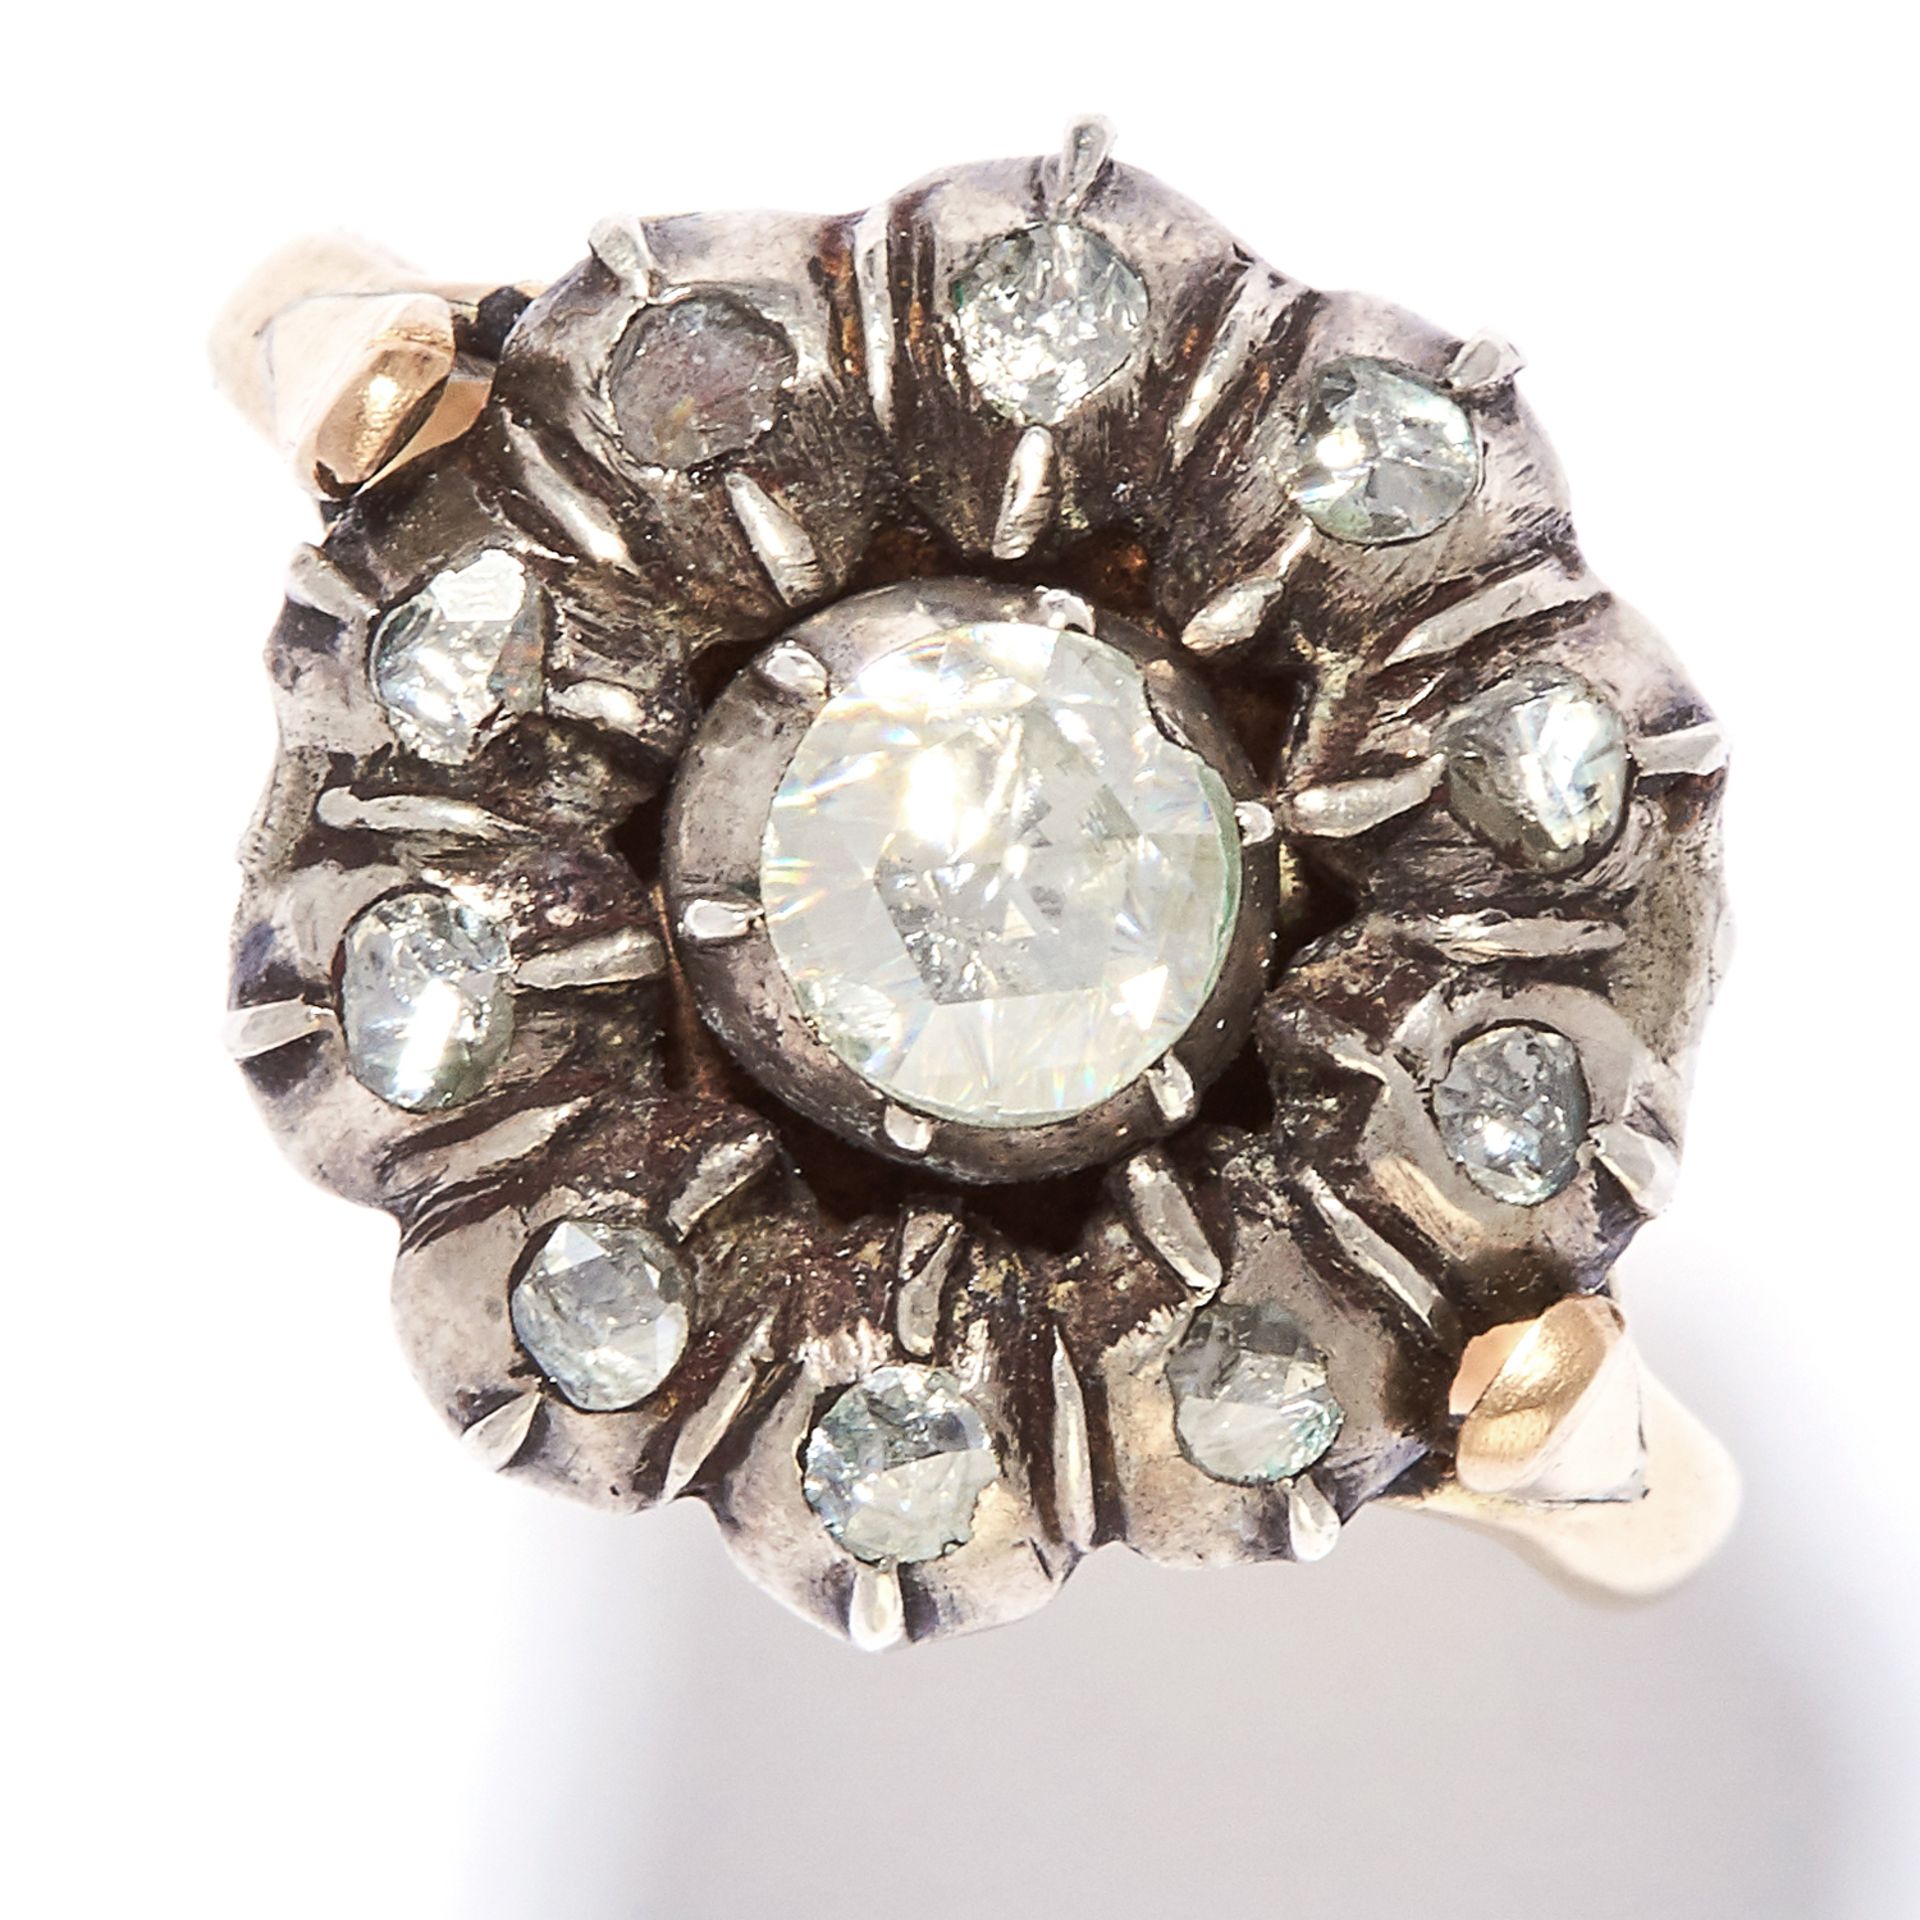 ANTIQUE DIAMOND CLUSTER RING, 19TH CENTURY in high carat yellow gold and silver, set with a